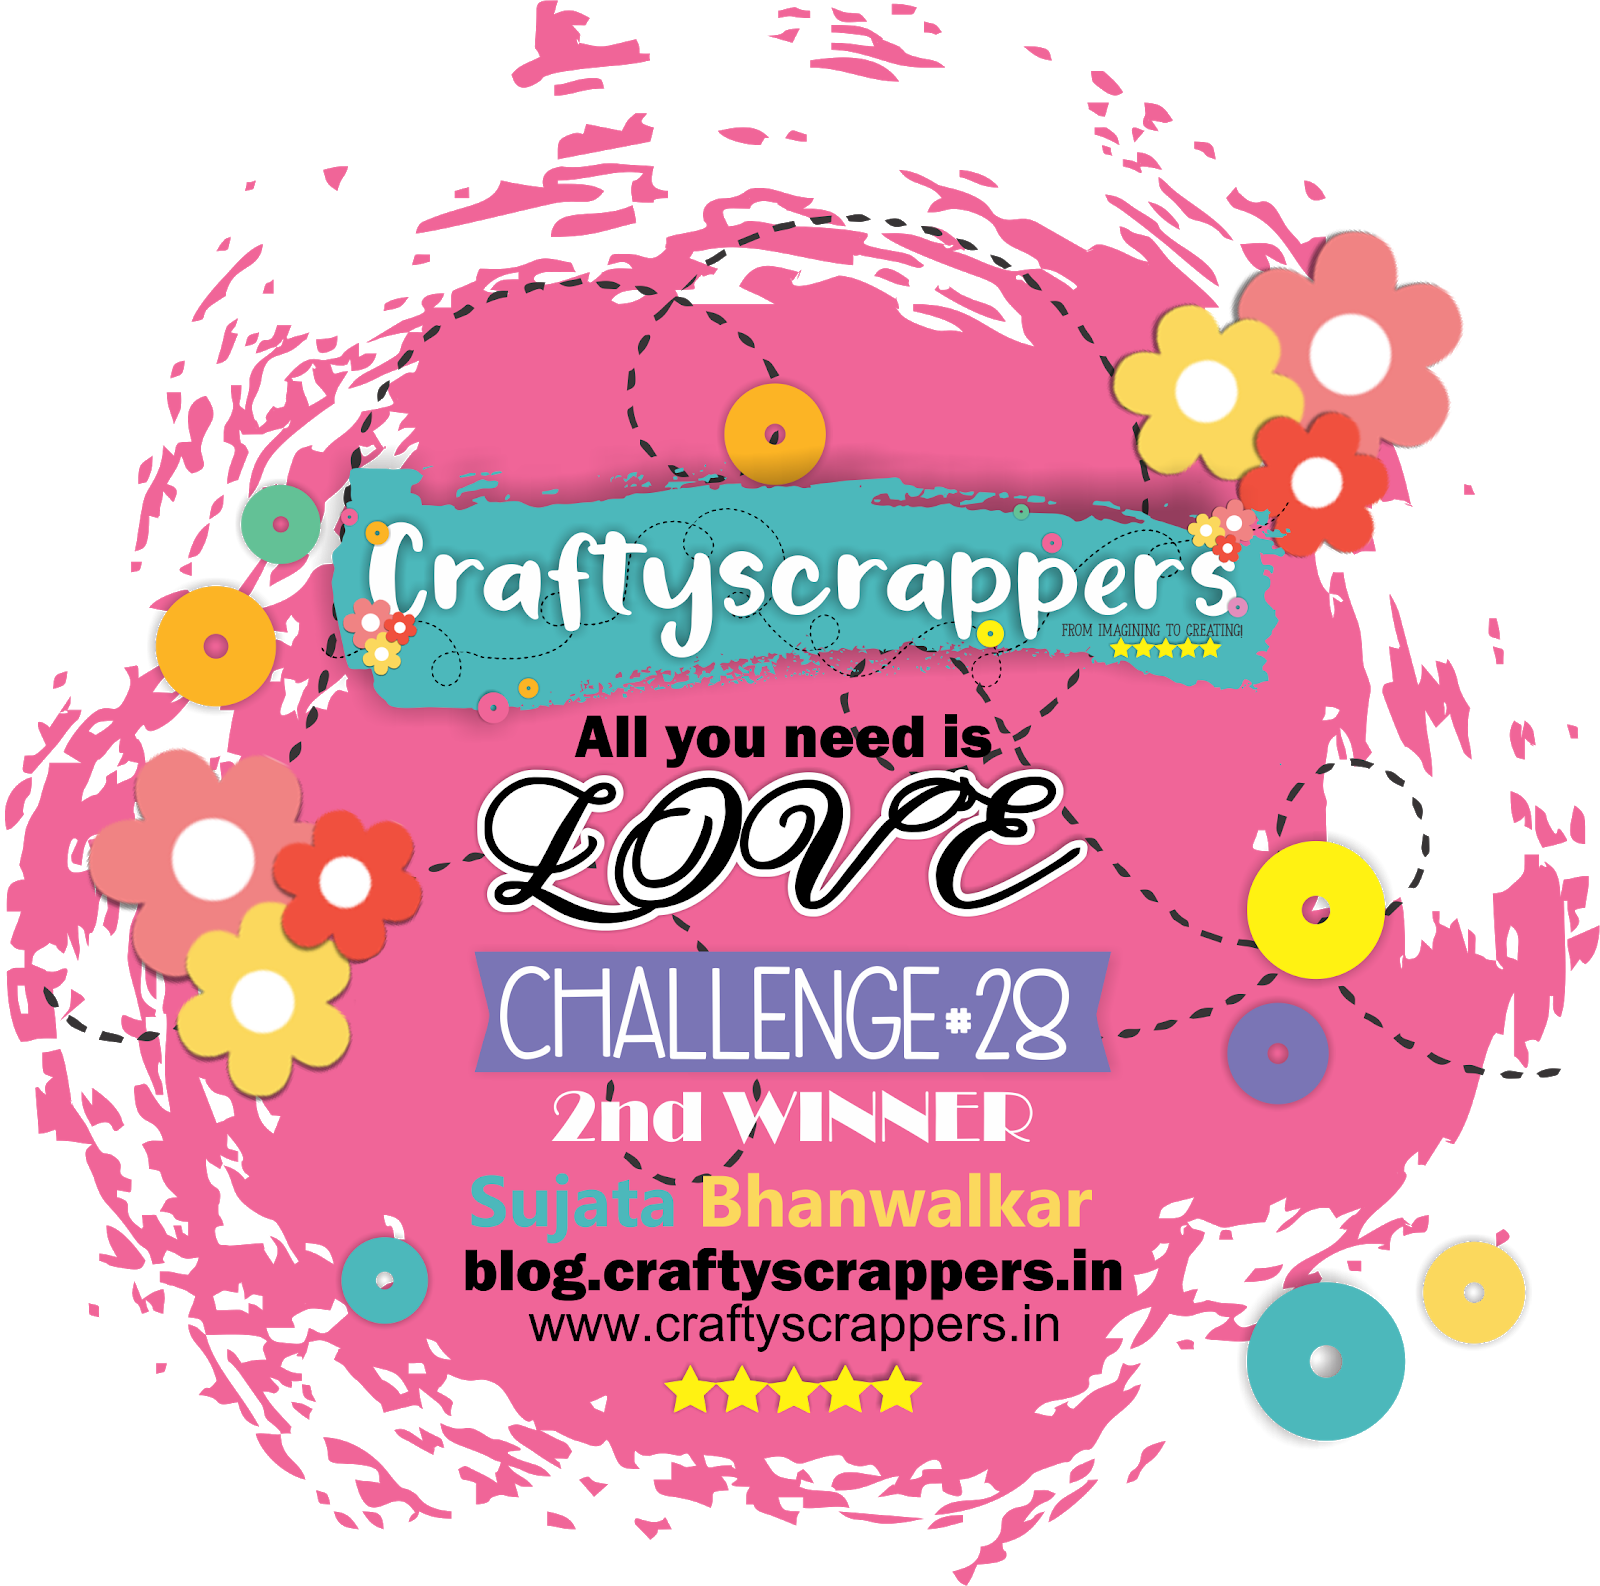 Craftyscrappers challenge 28 - All you need is Love